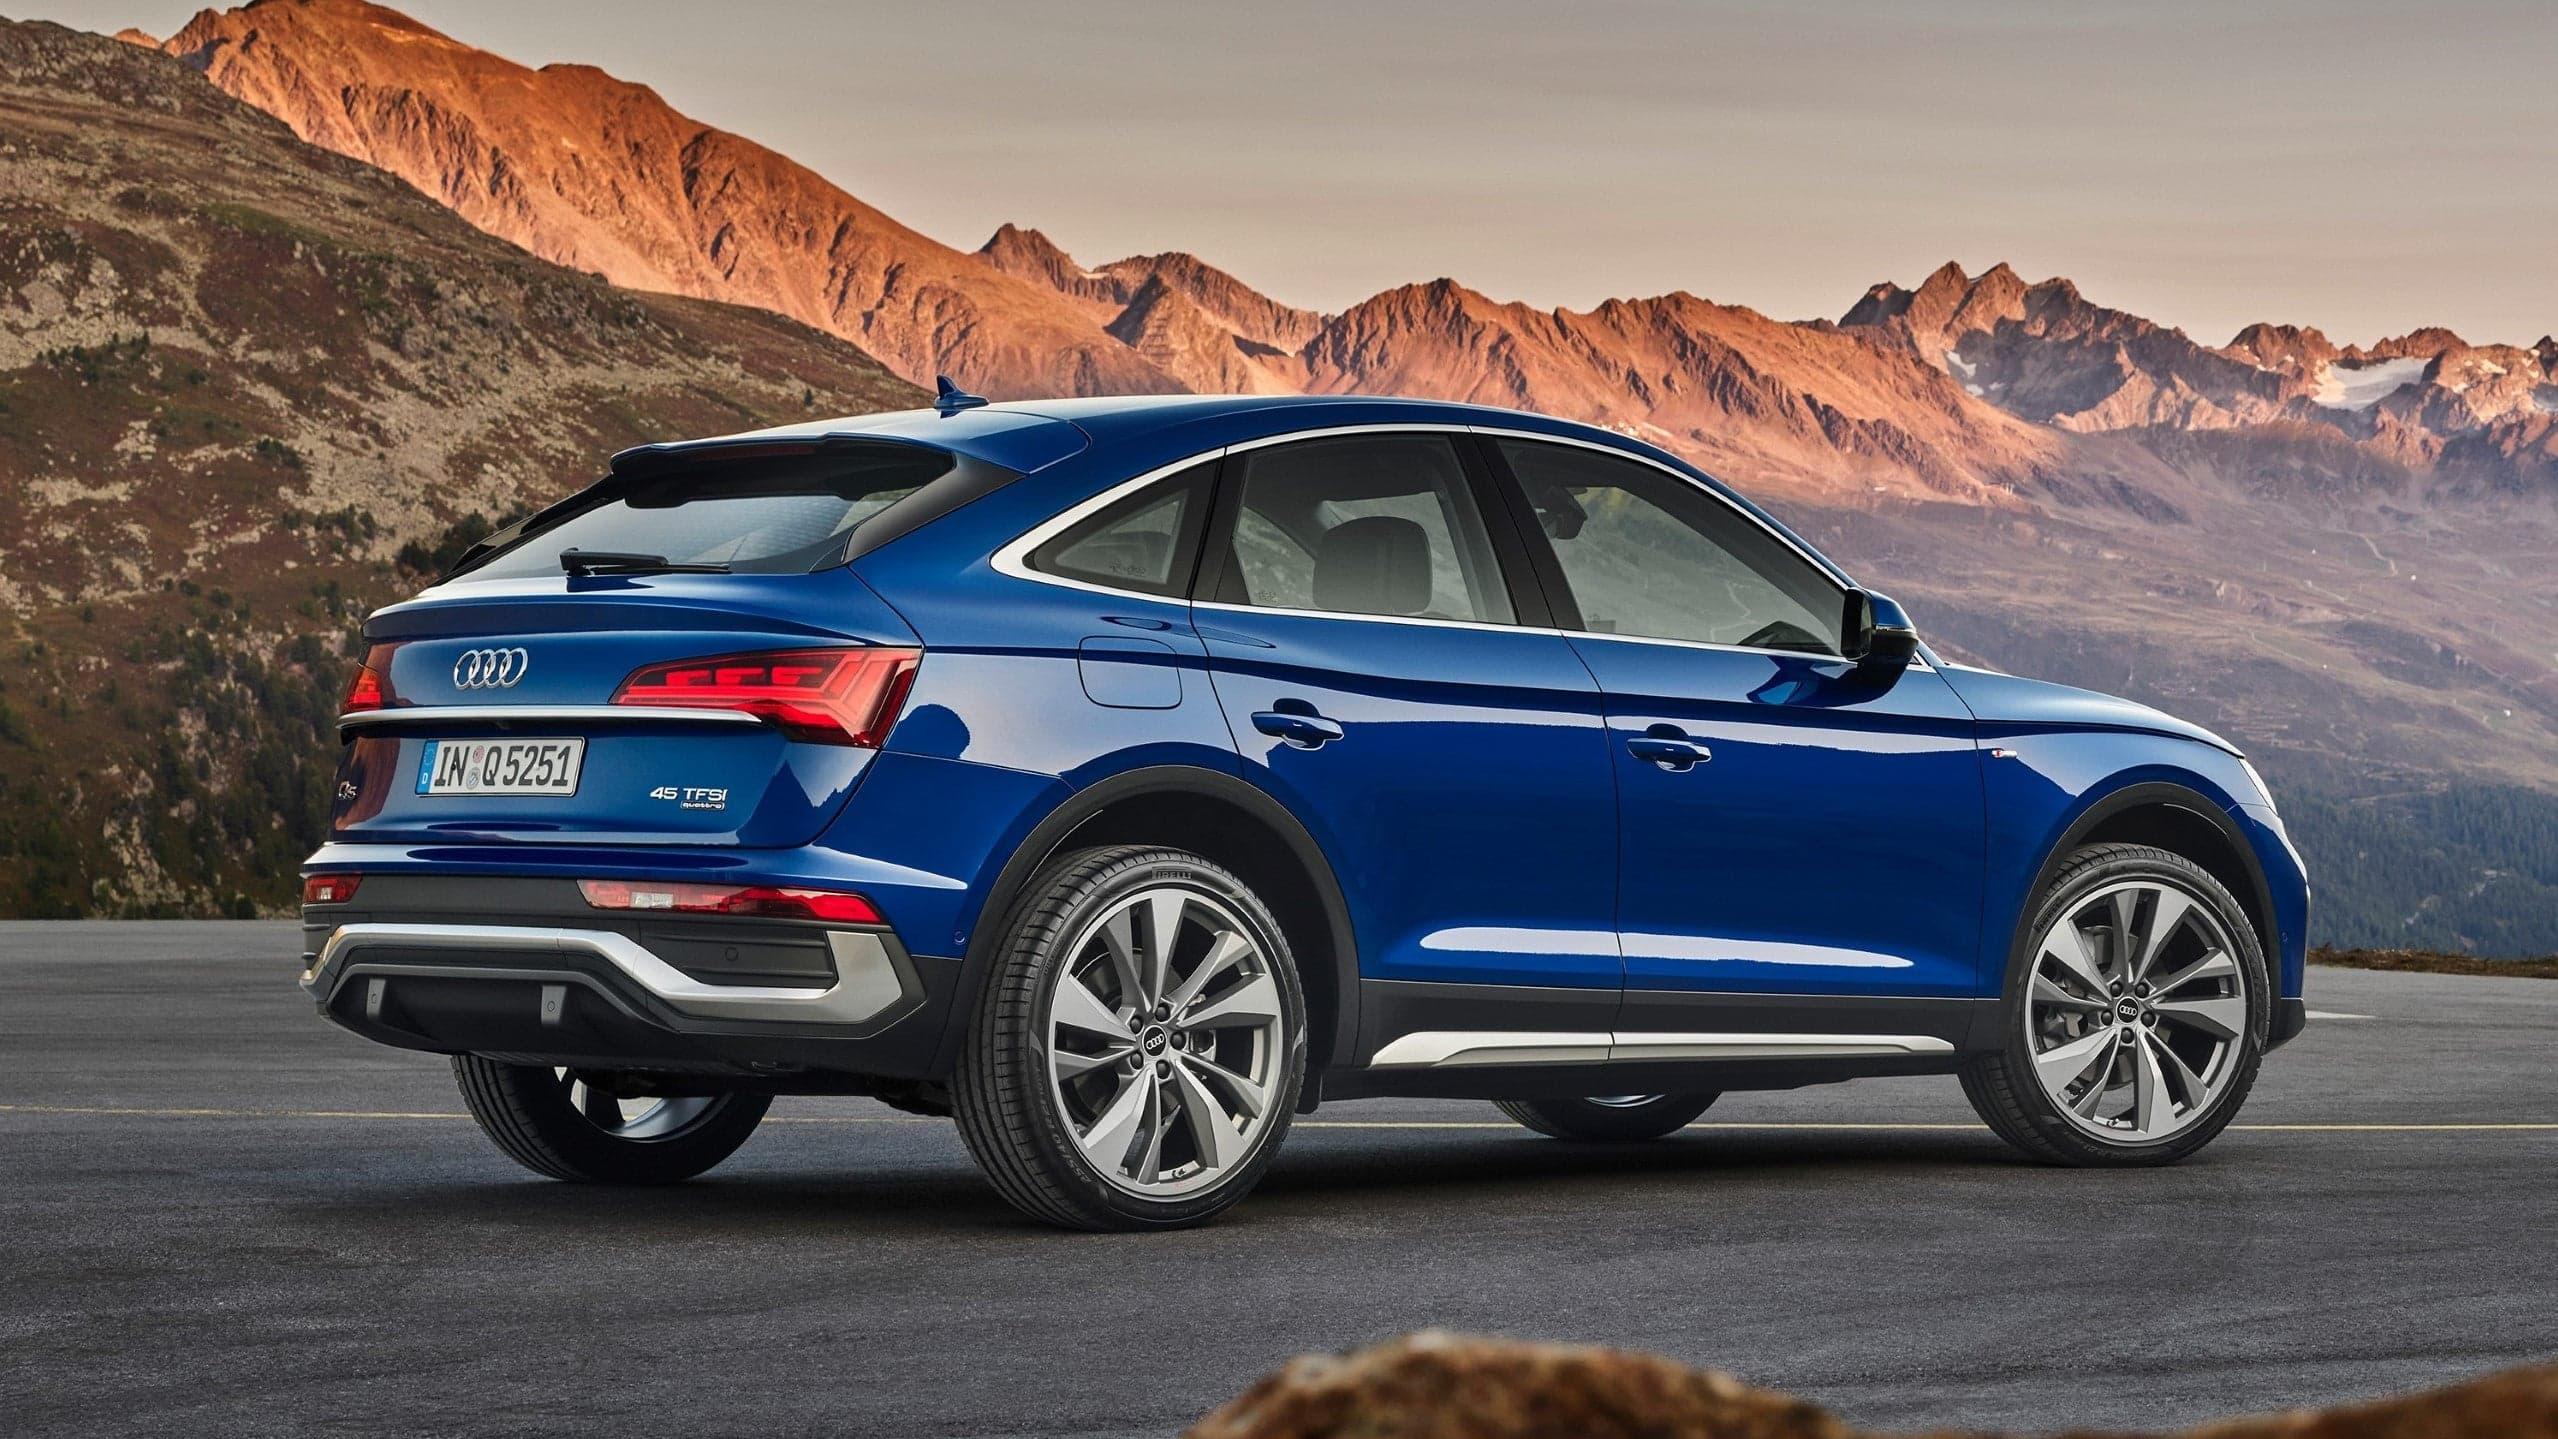 2021 Audi Q5 Sportback: For When You Want a TT But Have Too Many Kids